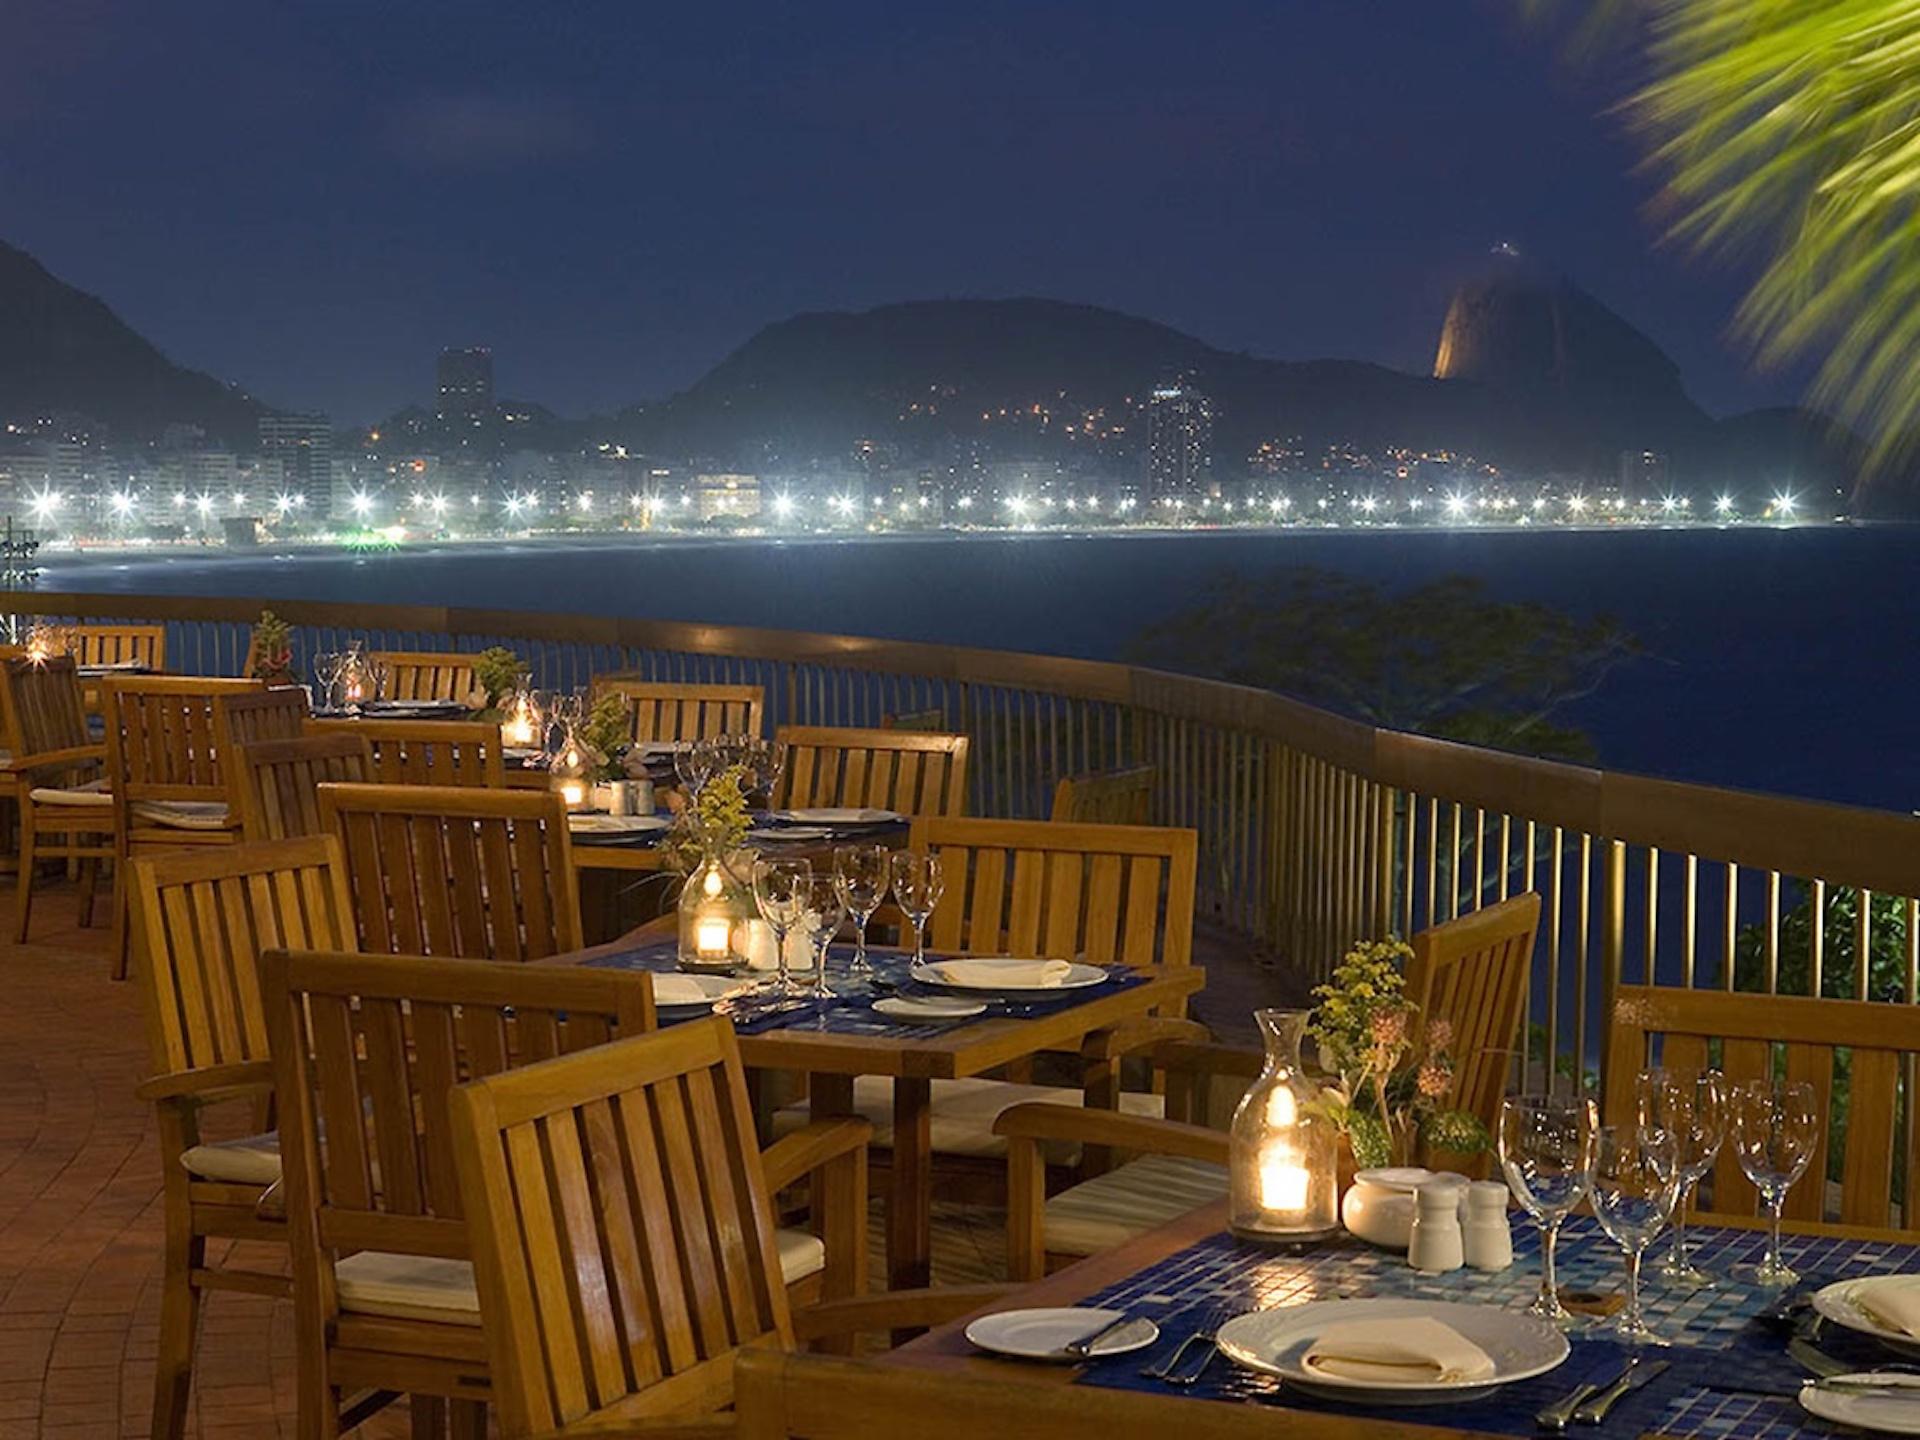 Hotel Sofitel Rio de Janeiro in Copacabana with Sugar Loaf in the background